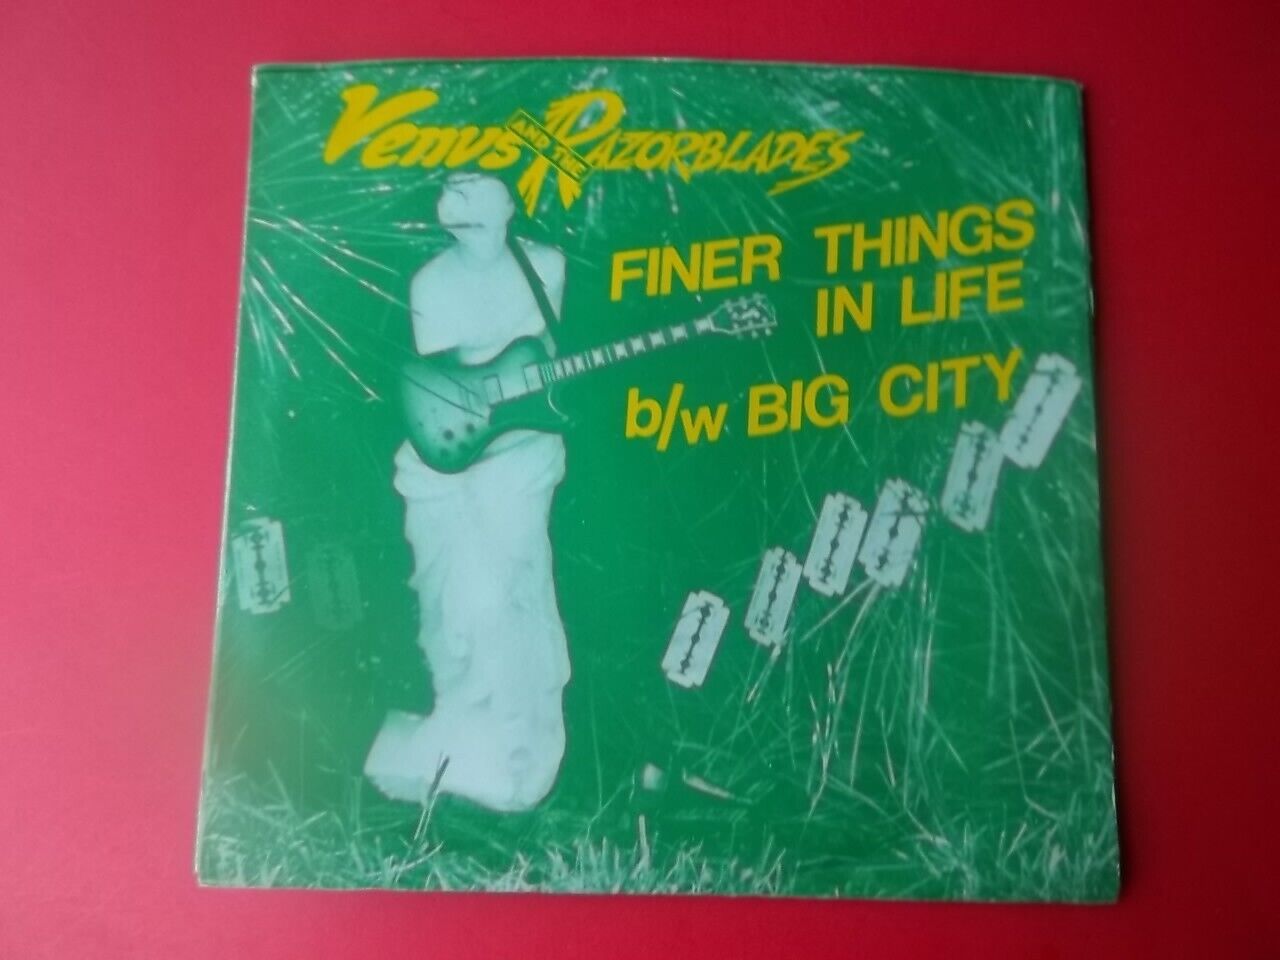 VENUS AND THE RAZOR BLADES FINER THINGS IN LIFE/BIG CITY 7" W/PICTURE SLEEVE